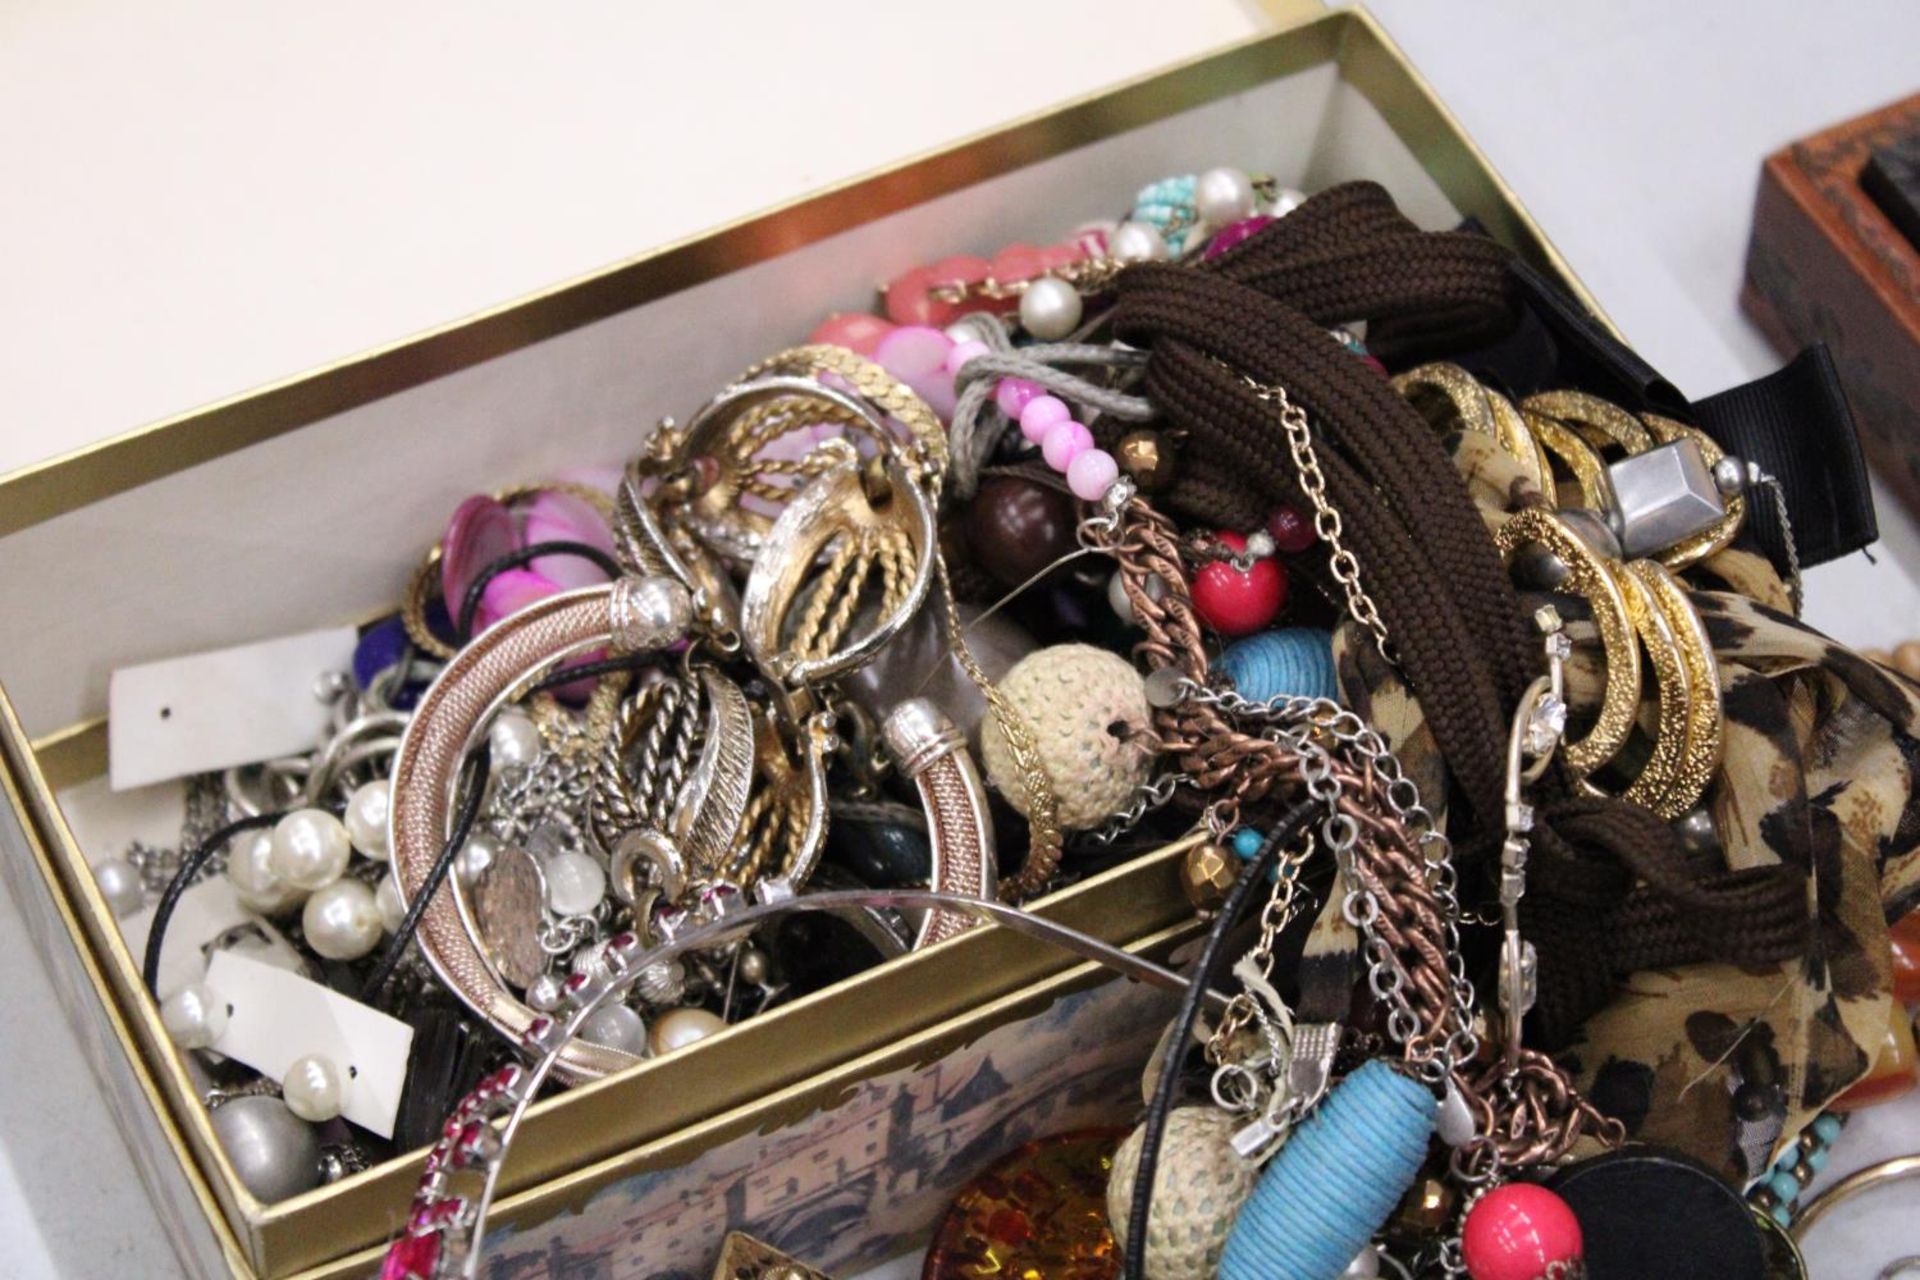 A QUANTITY OF COSTUME JEWELLERY TO INCLUDE NECKLACES, EARRINGS, BANGLES, ETC, IN A DOMED BOX - Image 3 of 5